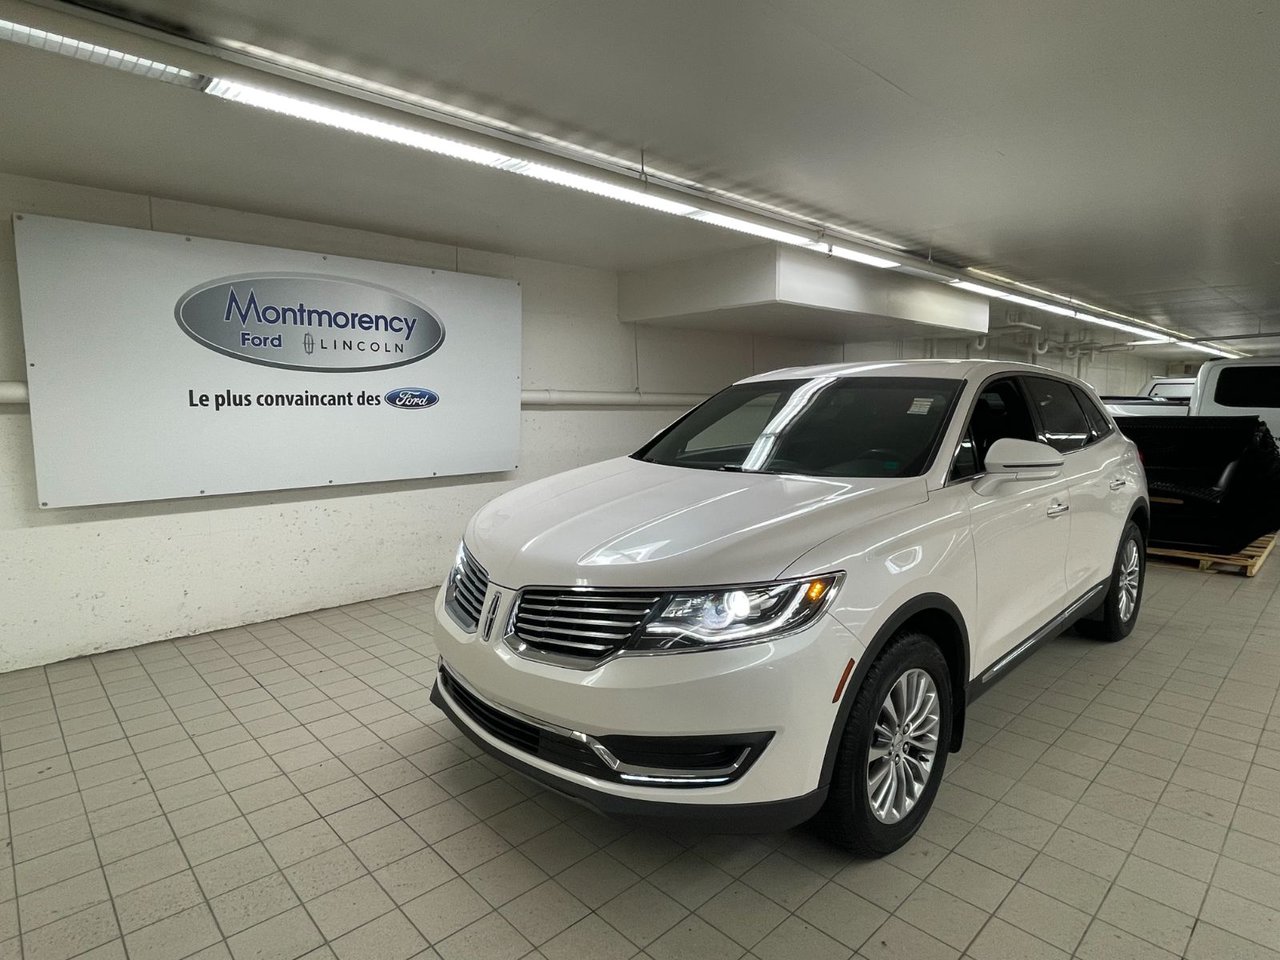 Lincoln MKX 2017 Select V6 3.7L AWD - ENS. REMORQUAGE, DÉMARRE